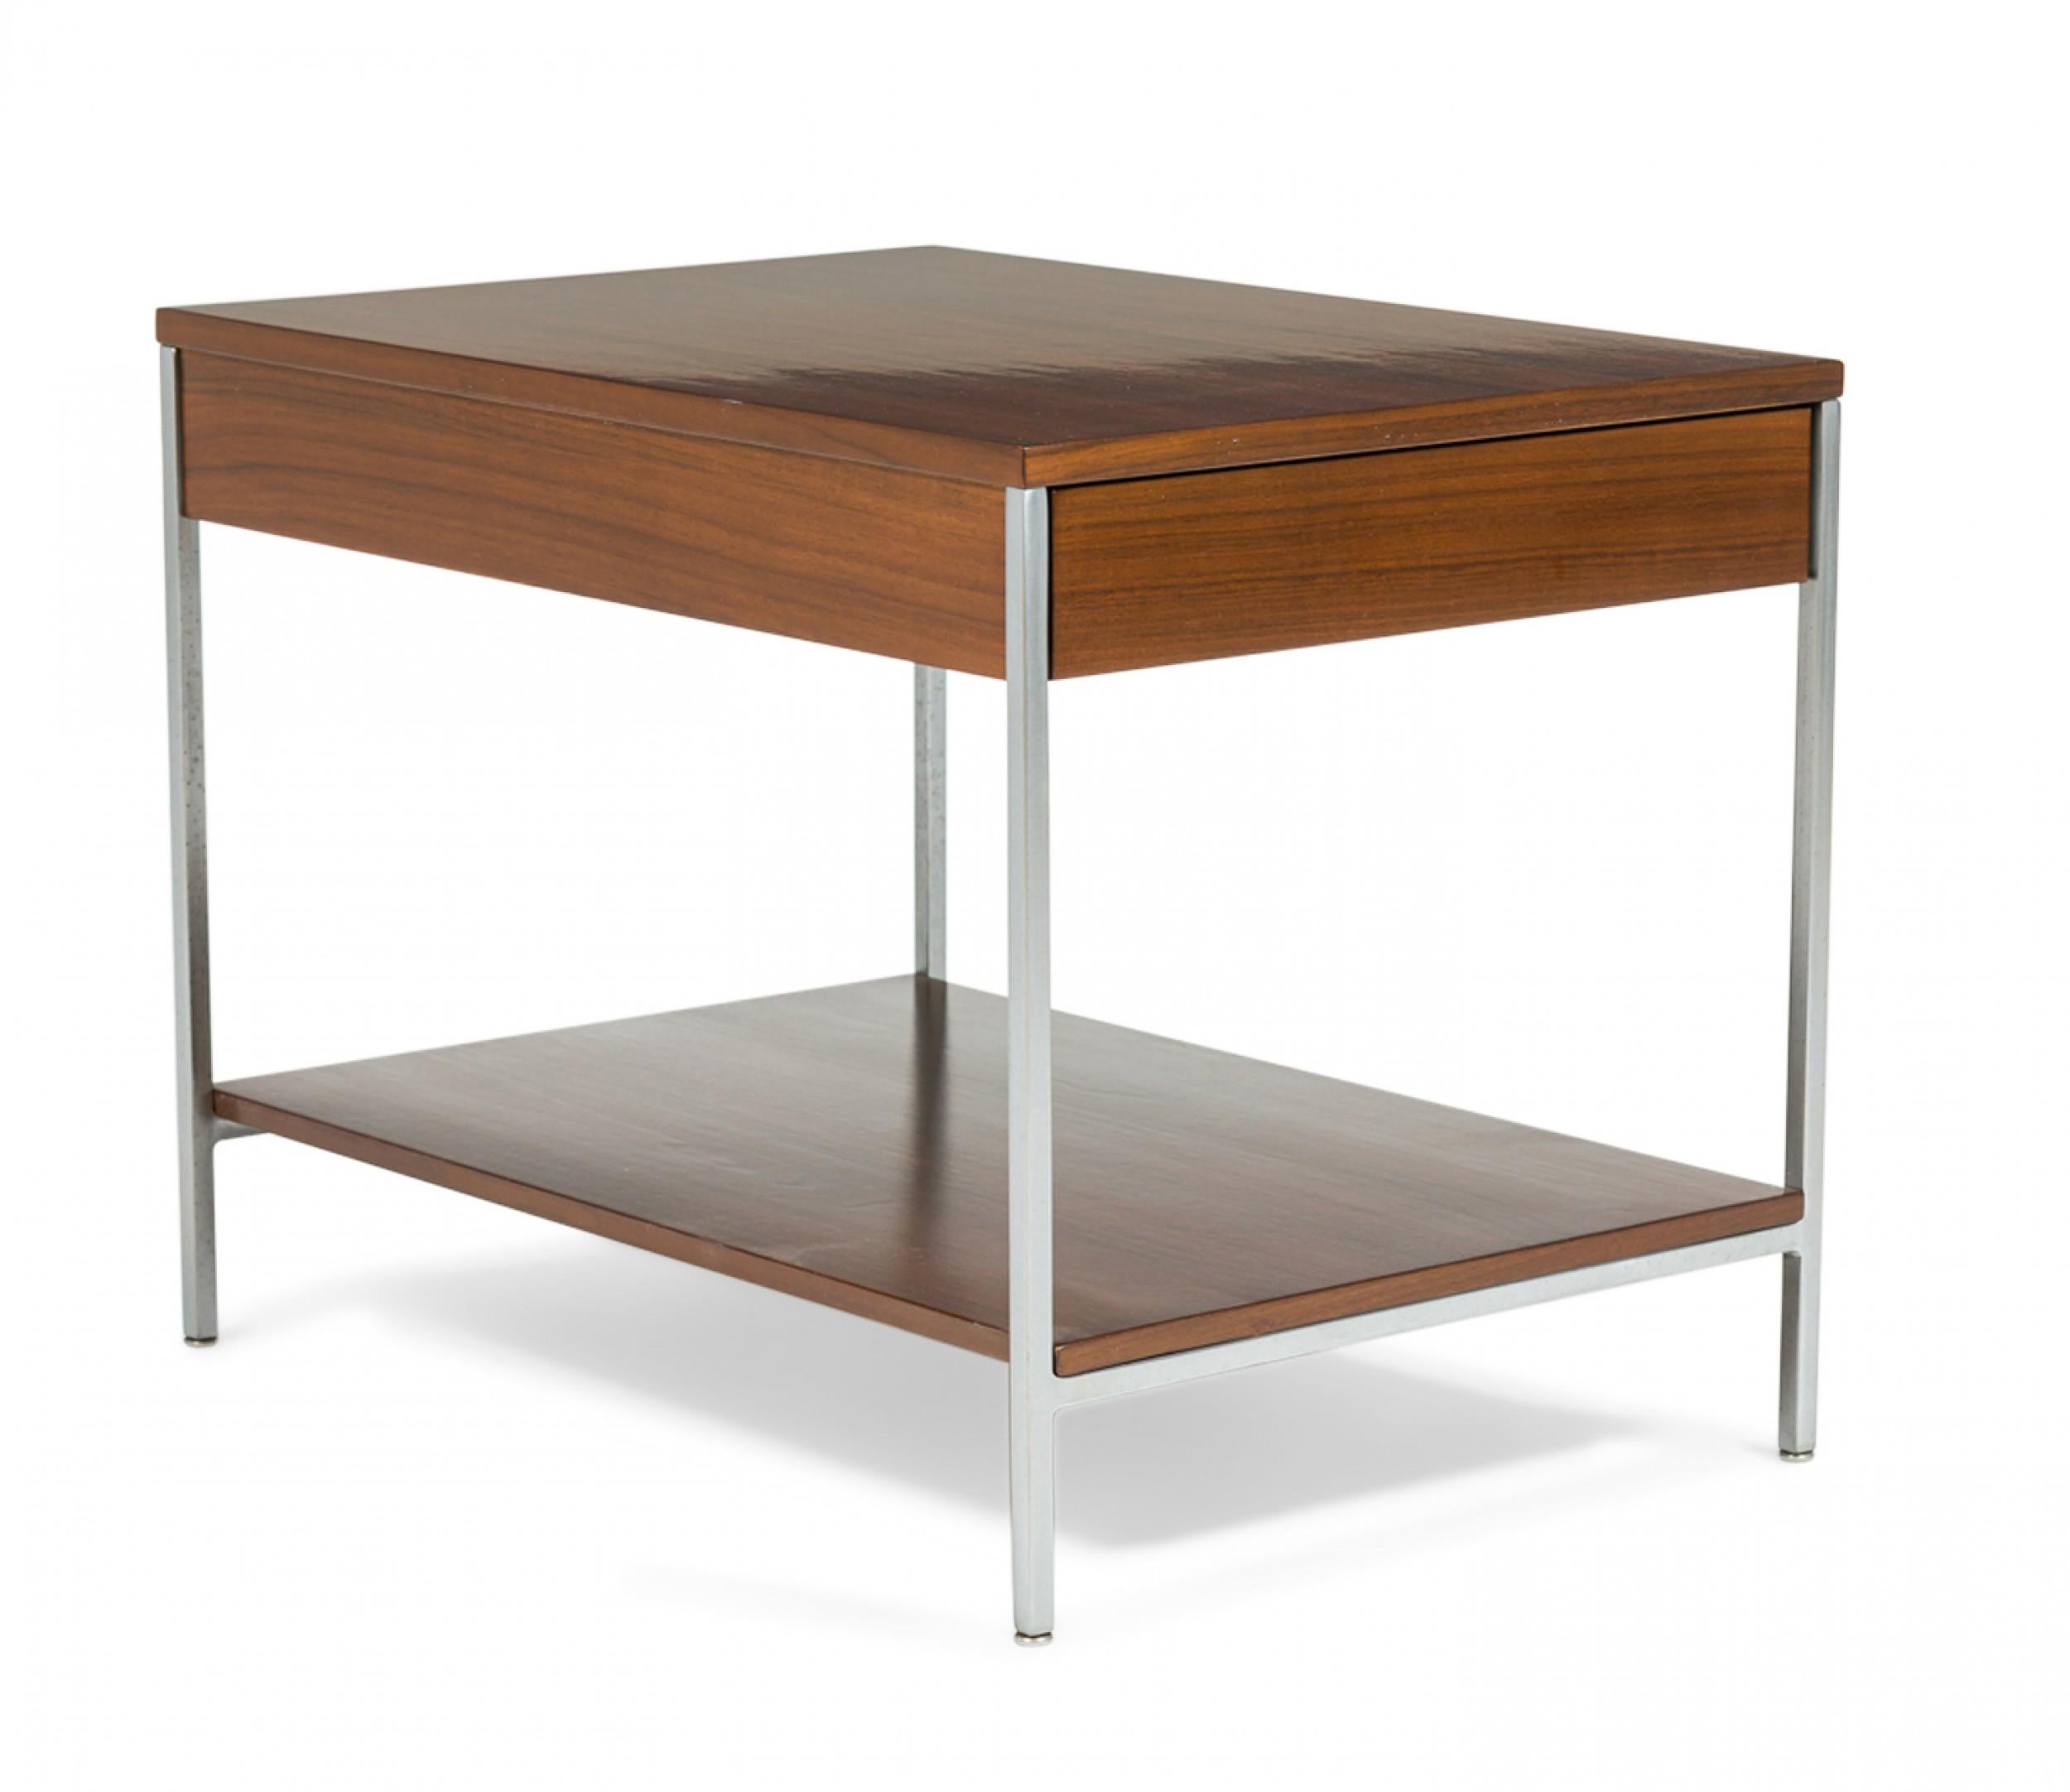 PAIR of American Mid-Century end / side tables with a walnut veneer top with single drawer and stretcher shelf, supported by four square satin chrome legs. (GEORGE NELSON FOR HERMAN MILLER)(PRICED AS PAIR)(Similar Pair: DUF0307A)